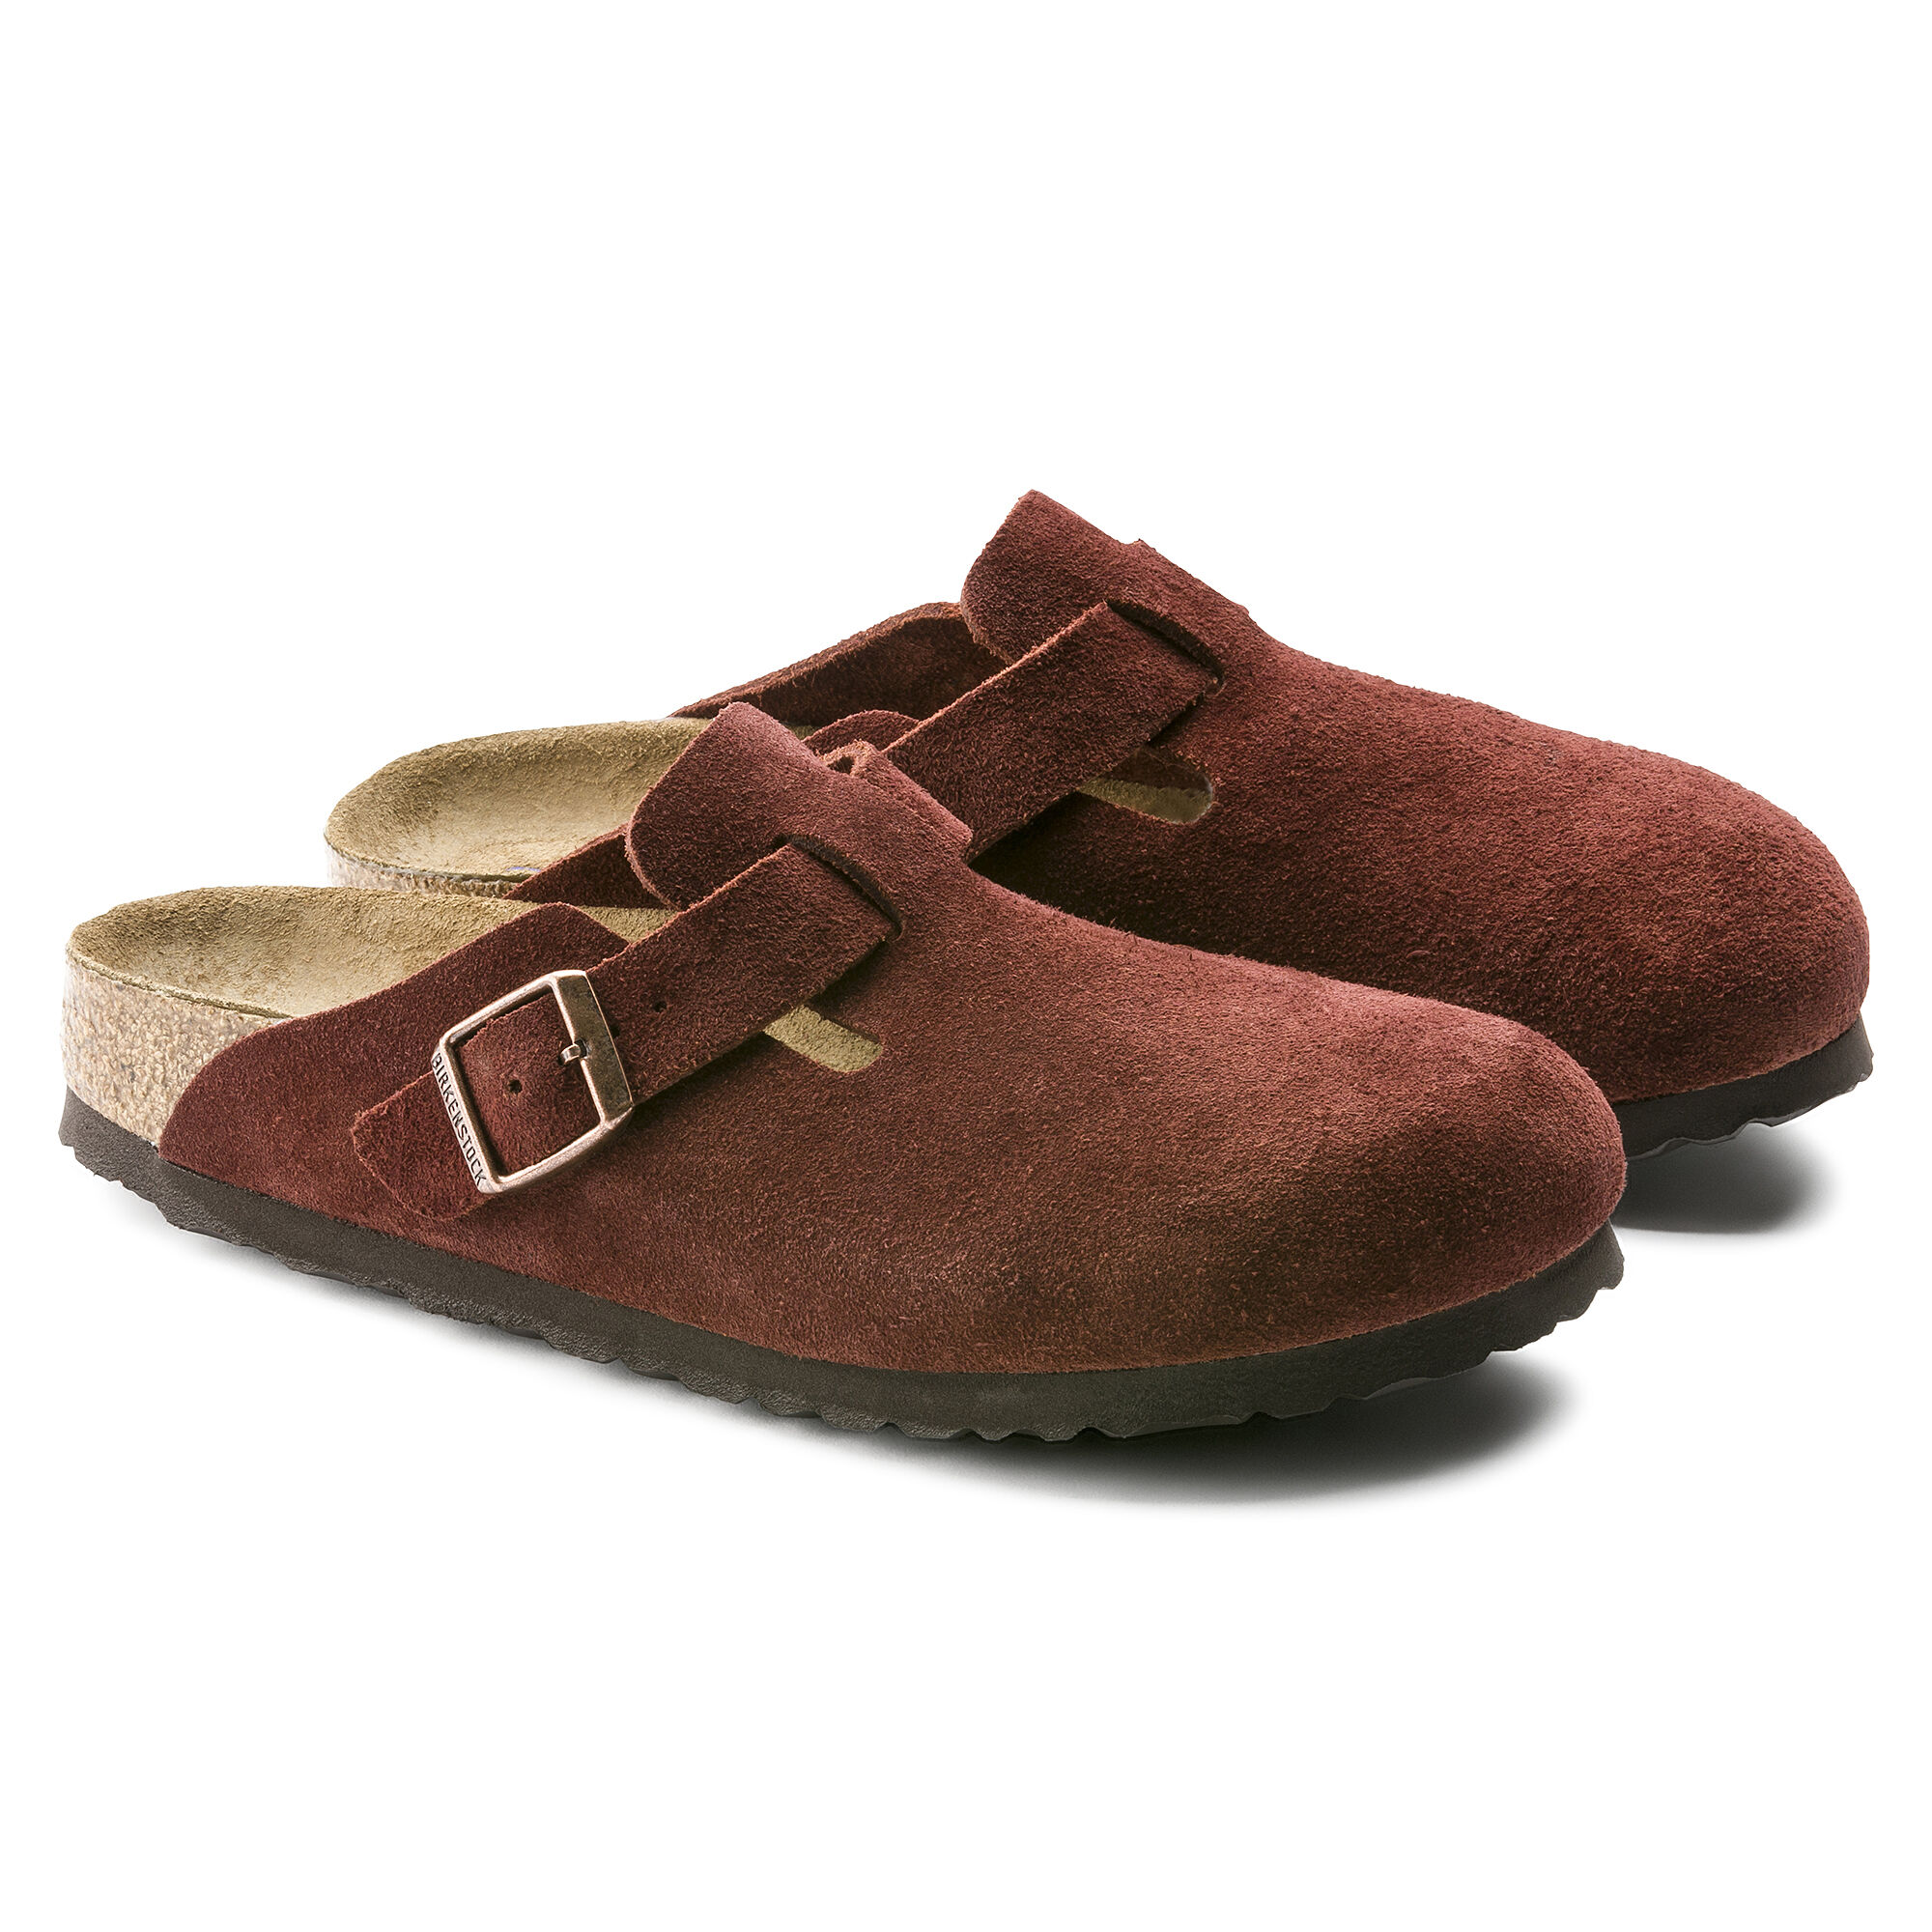 Boston Suede Leather Port